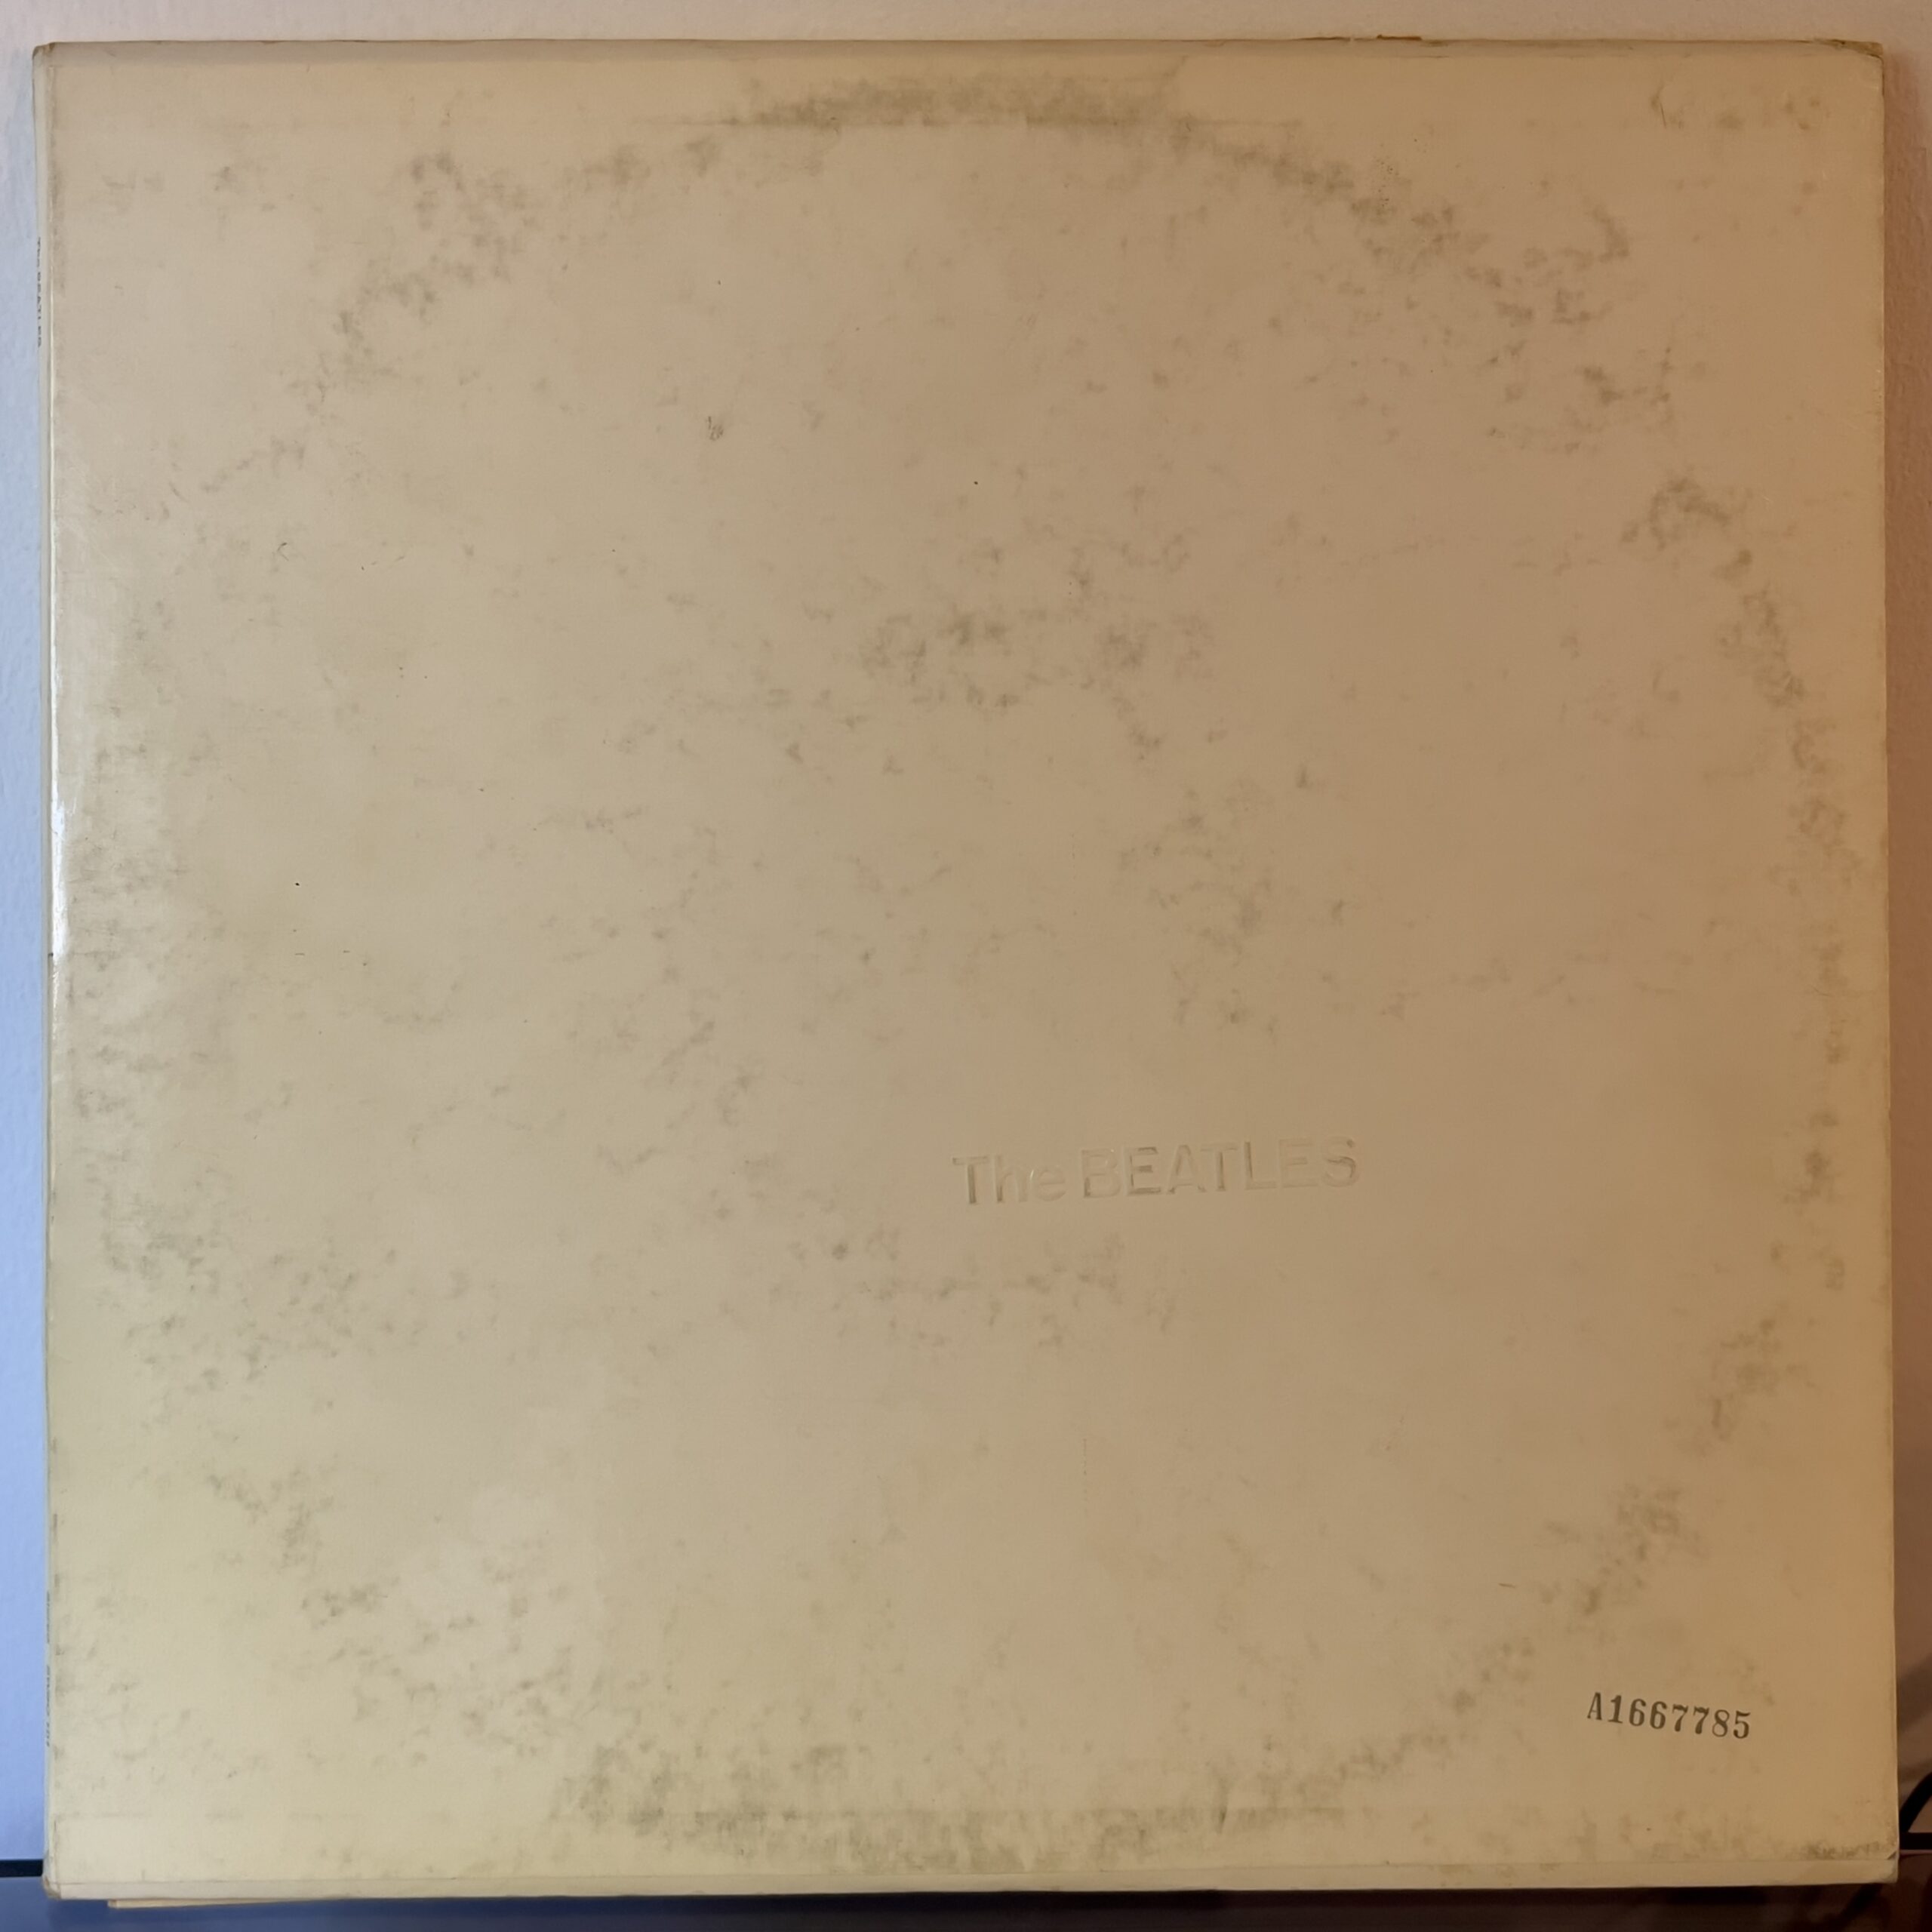 The White Album by The Beatles